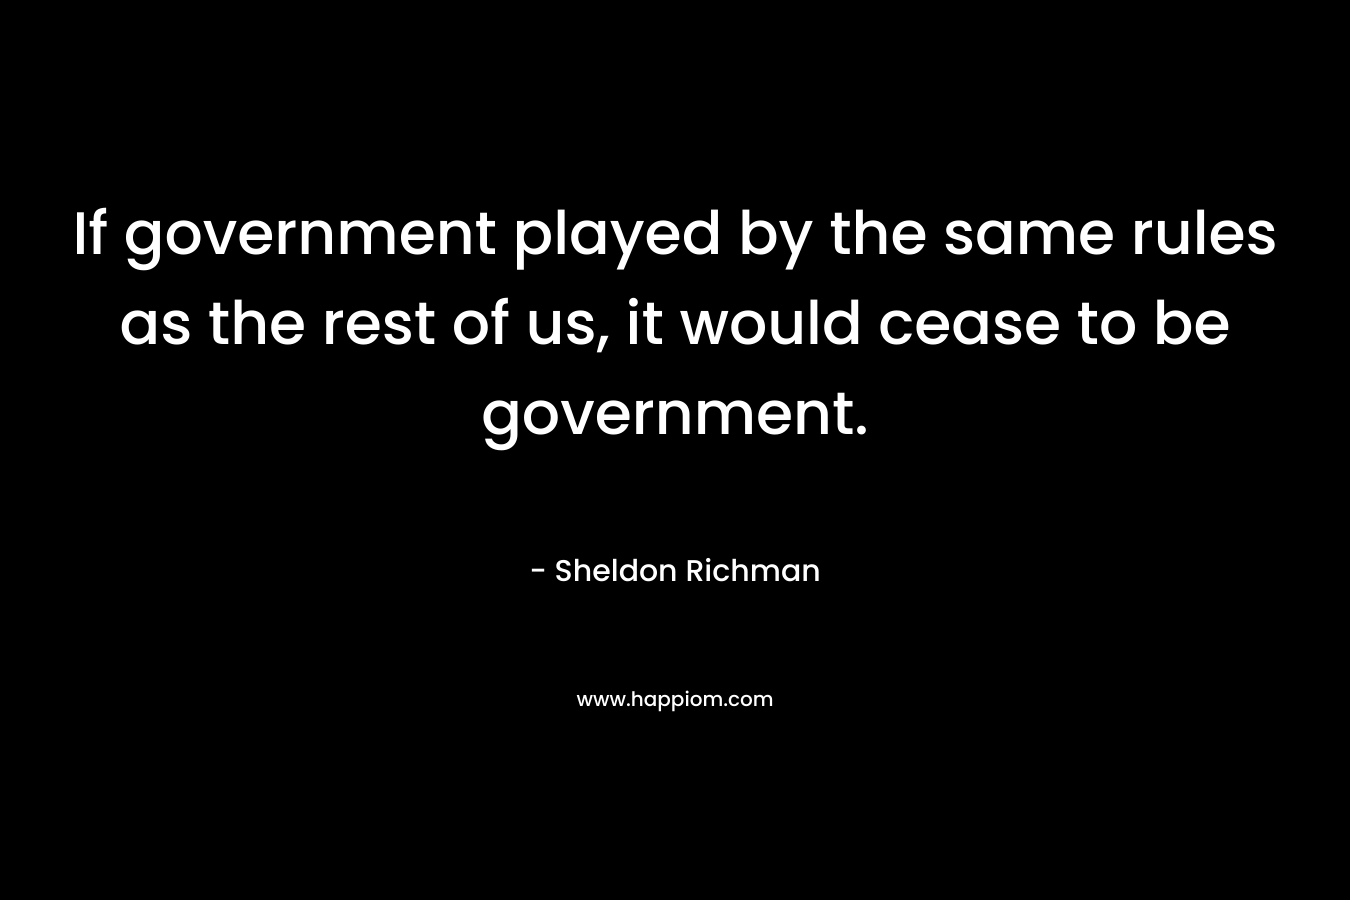 If government played by the same rules as the rest of us, it would cease to be government. – Sheldon Richman